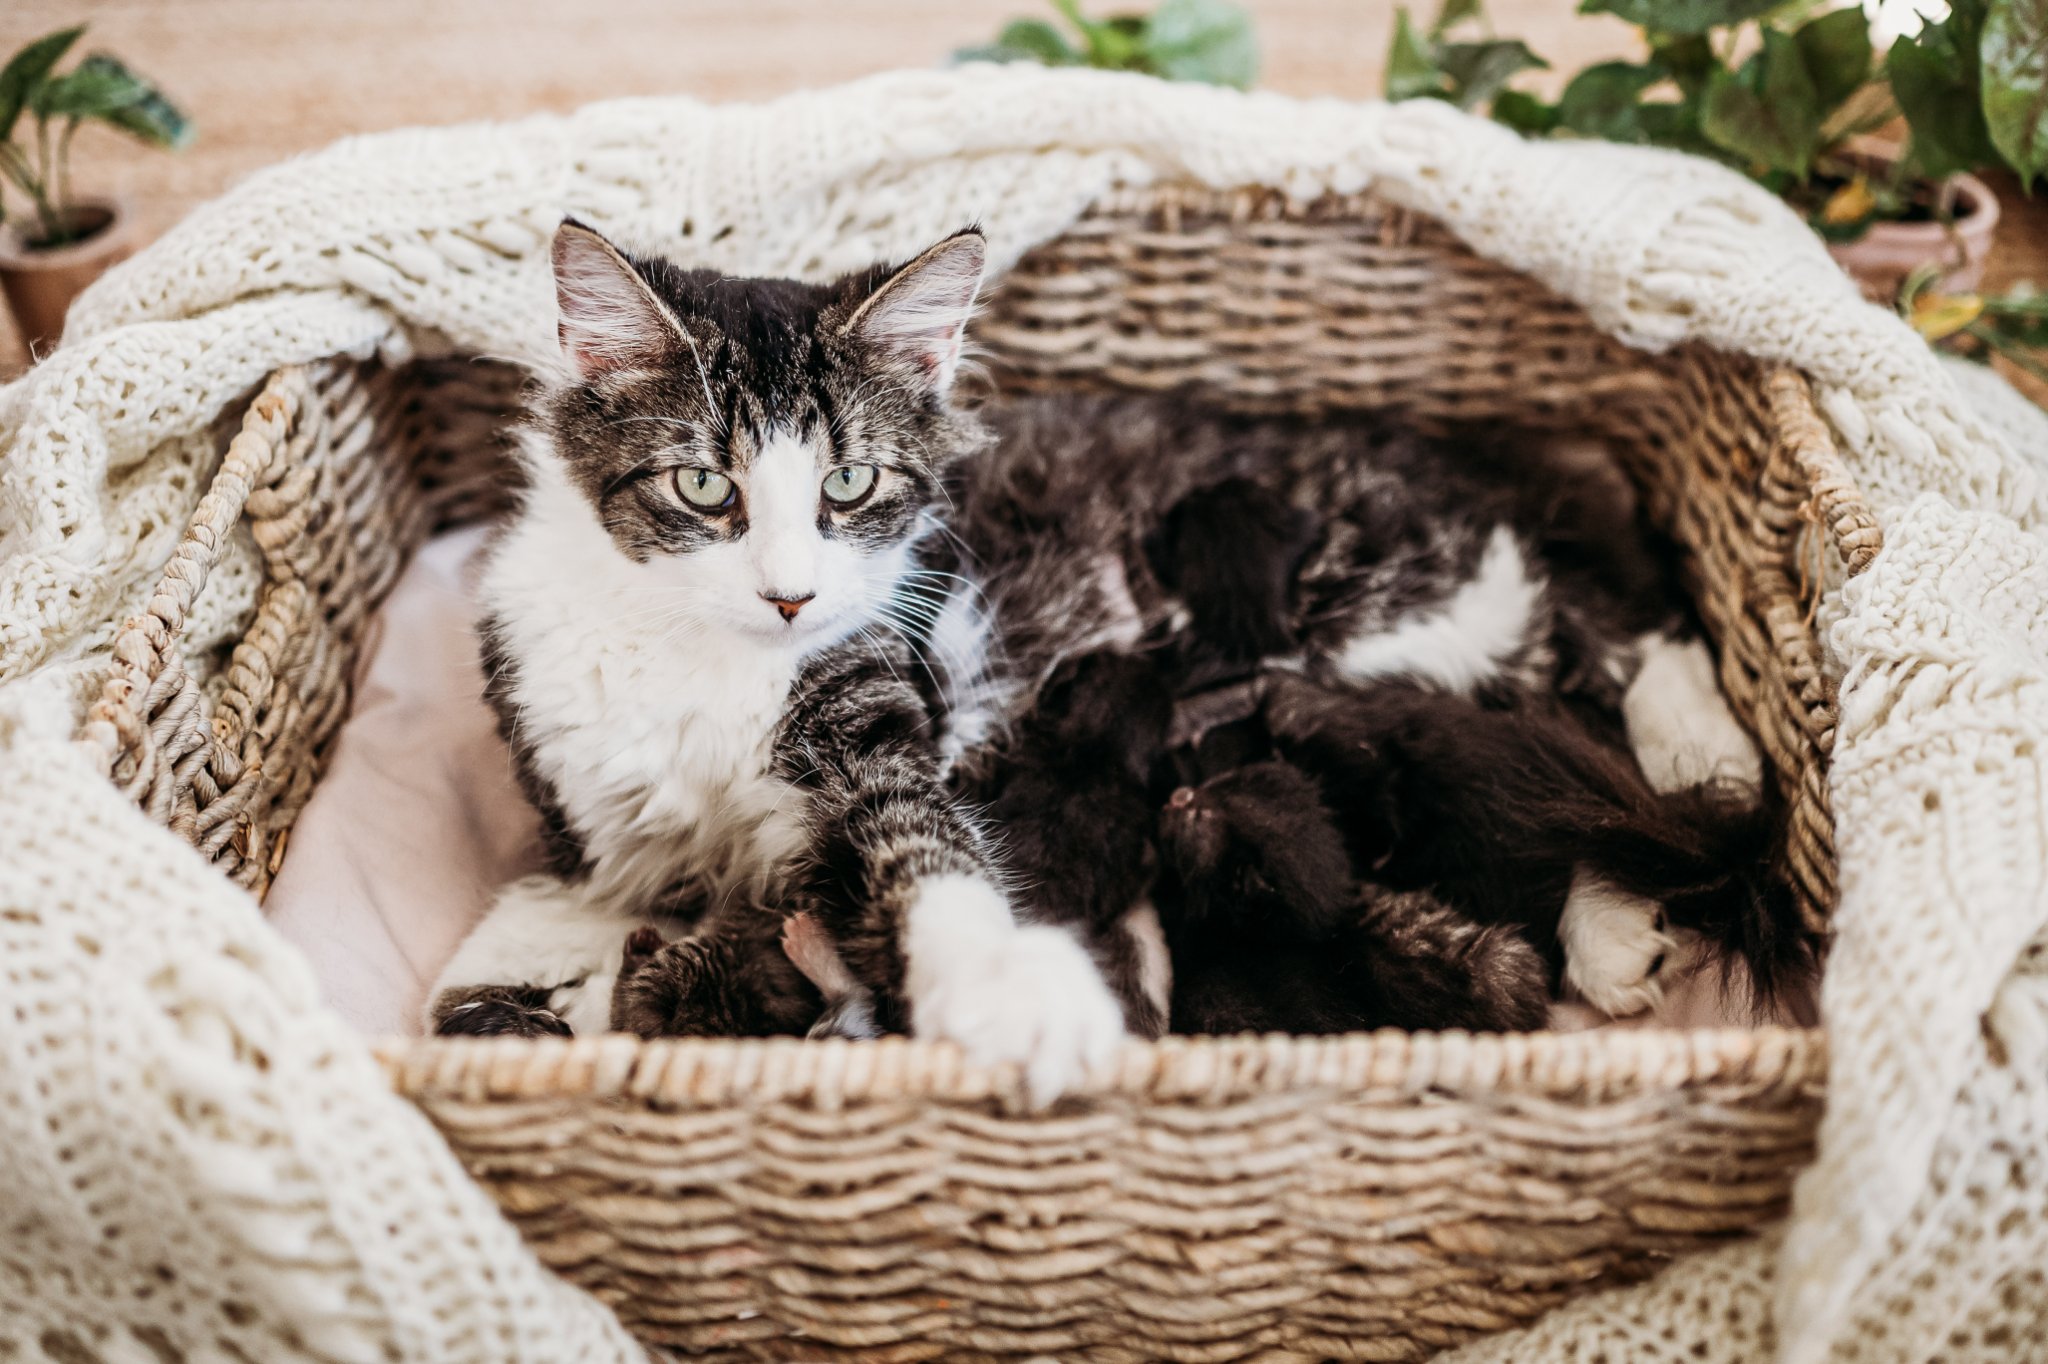 Momma cat with kittens